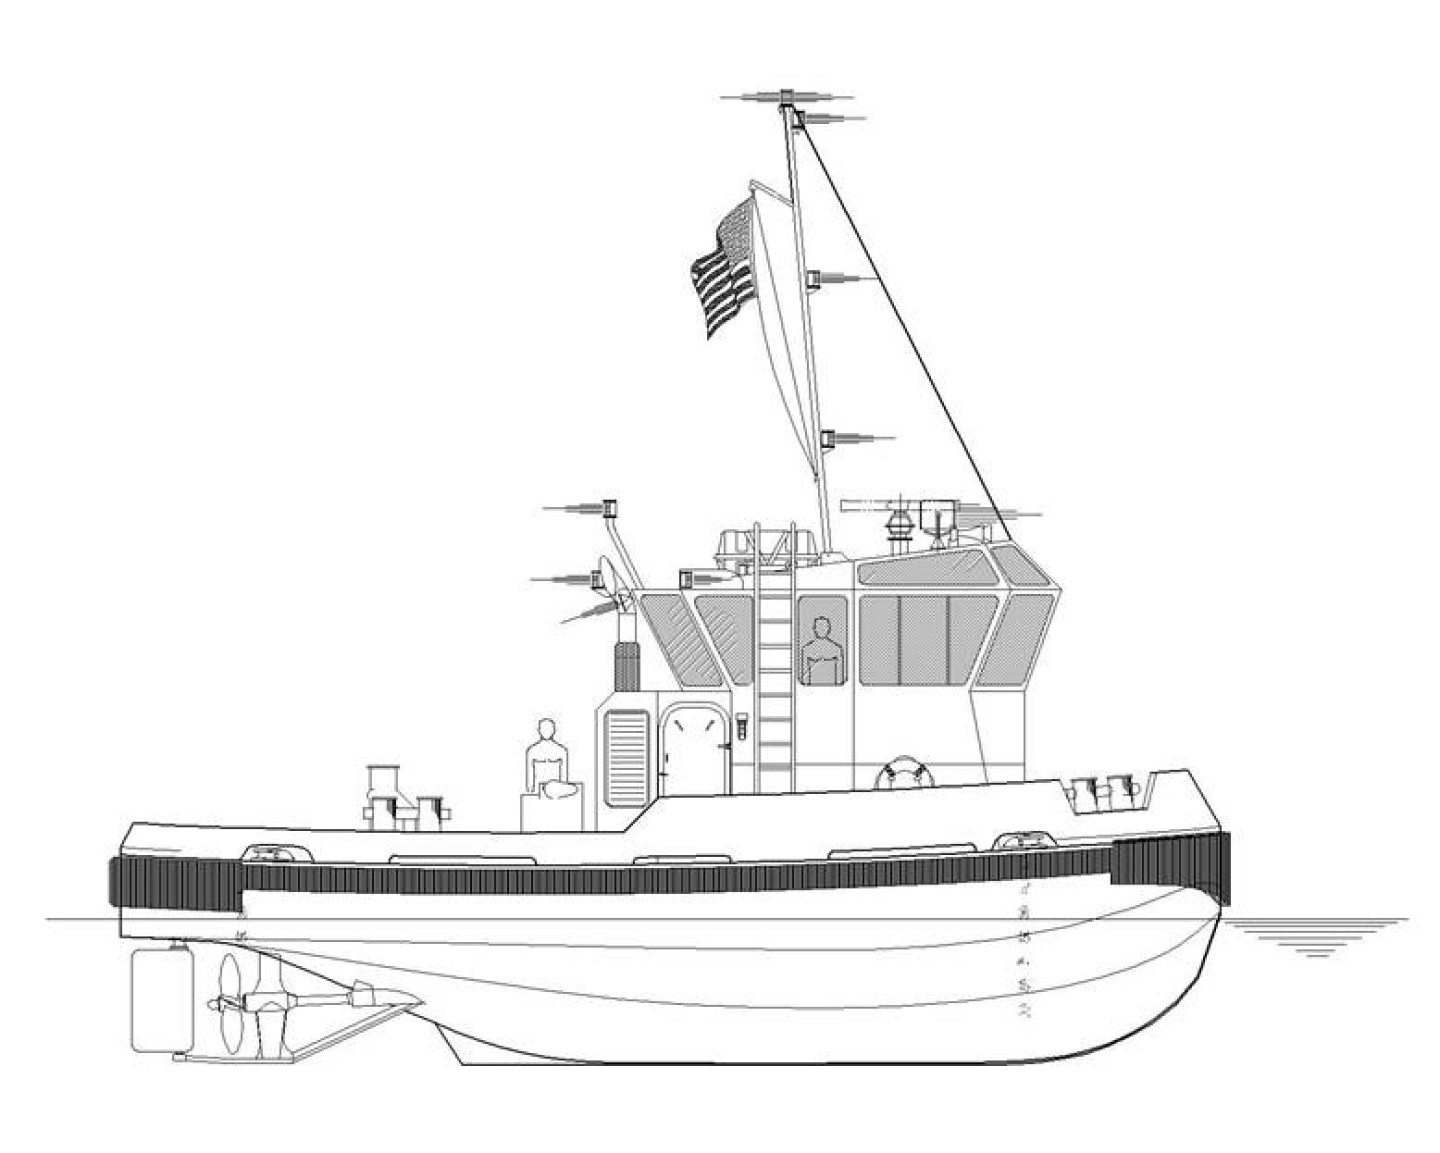 two-tug-vessels-for-new-york-power-authority-1